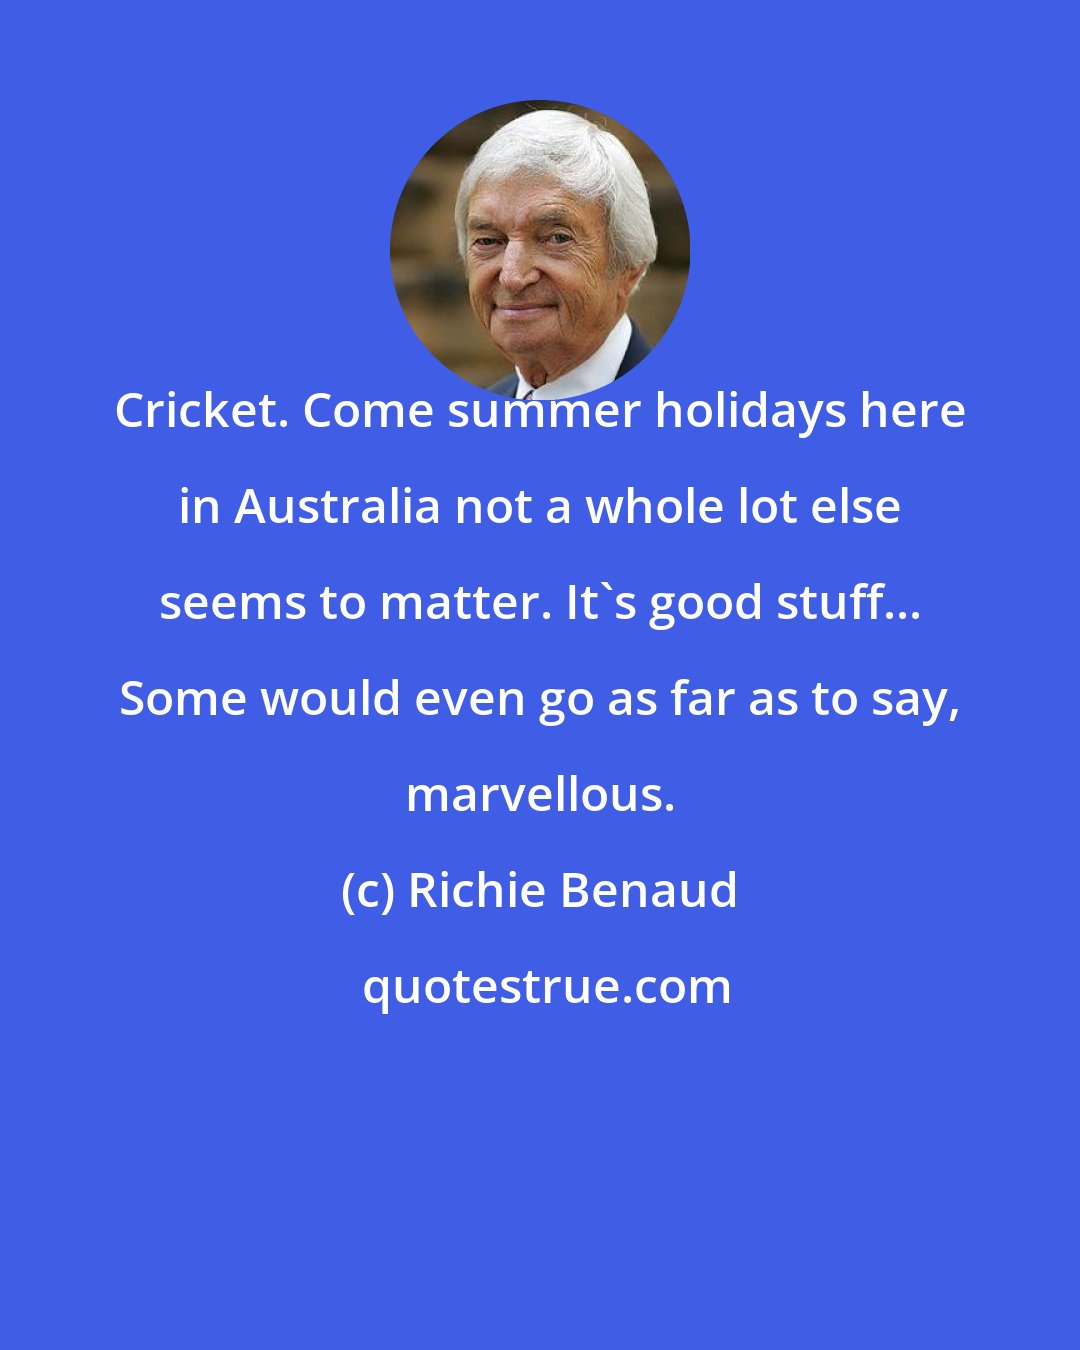 Richie Benaud: Cricket. Come summer holidays here in Australia not a whole lot else seems to matter. It's good stuff... Some would even go as far as to say, marvellous.